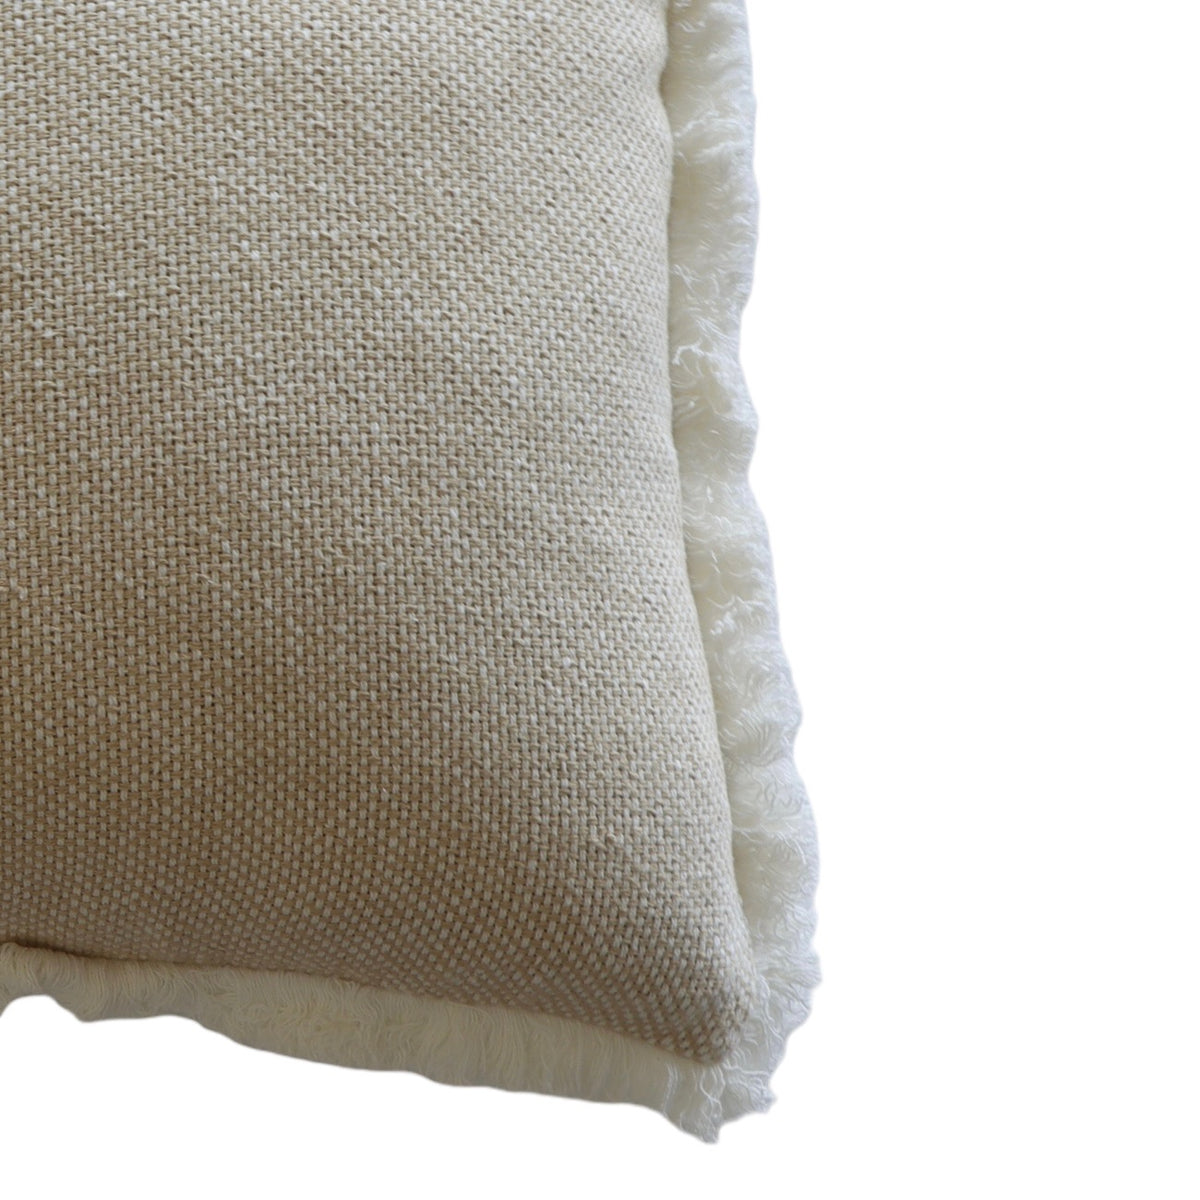 Zachary Oat Textured Woven Pillow Cover - 18 Inch - Holistic Habitat 